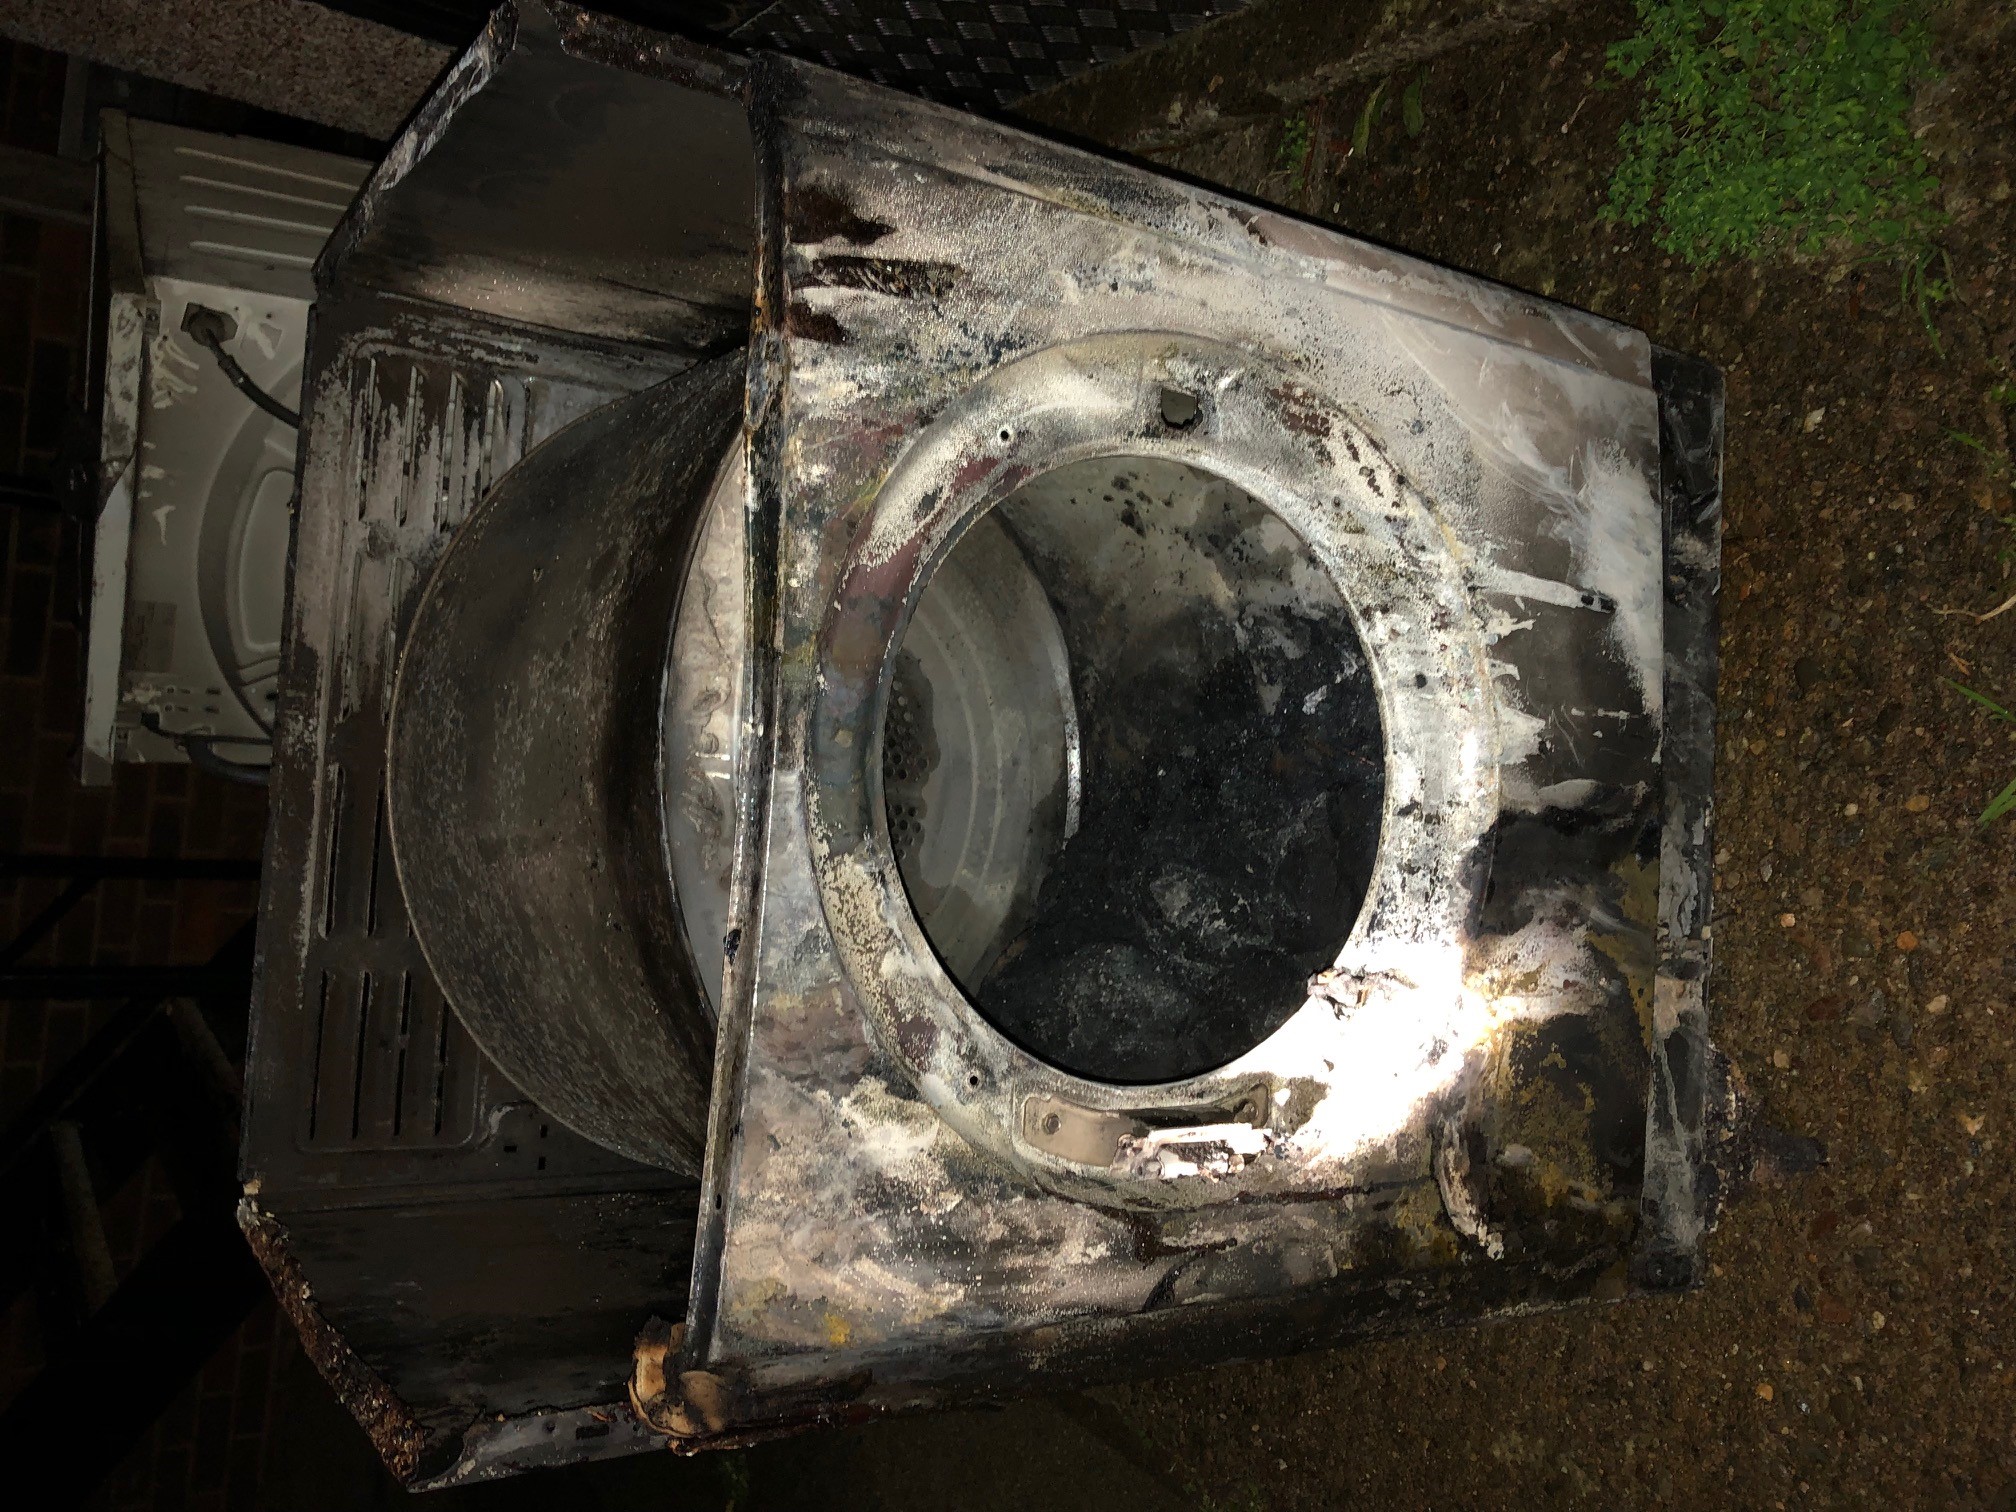 Tumble Dryer fire above Connah’s Quay pub highlights importance of basic fire safety precautions